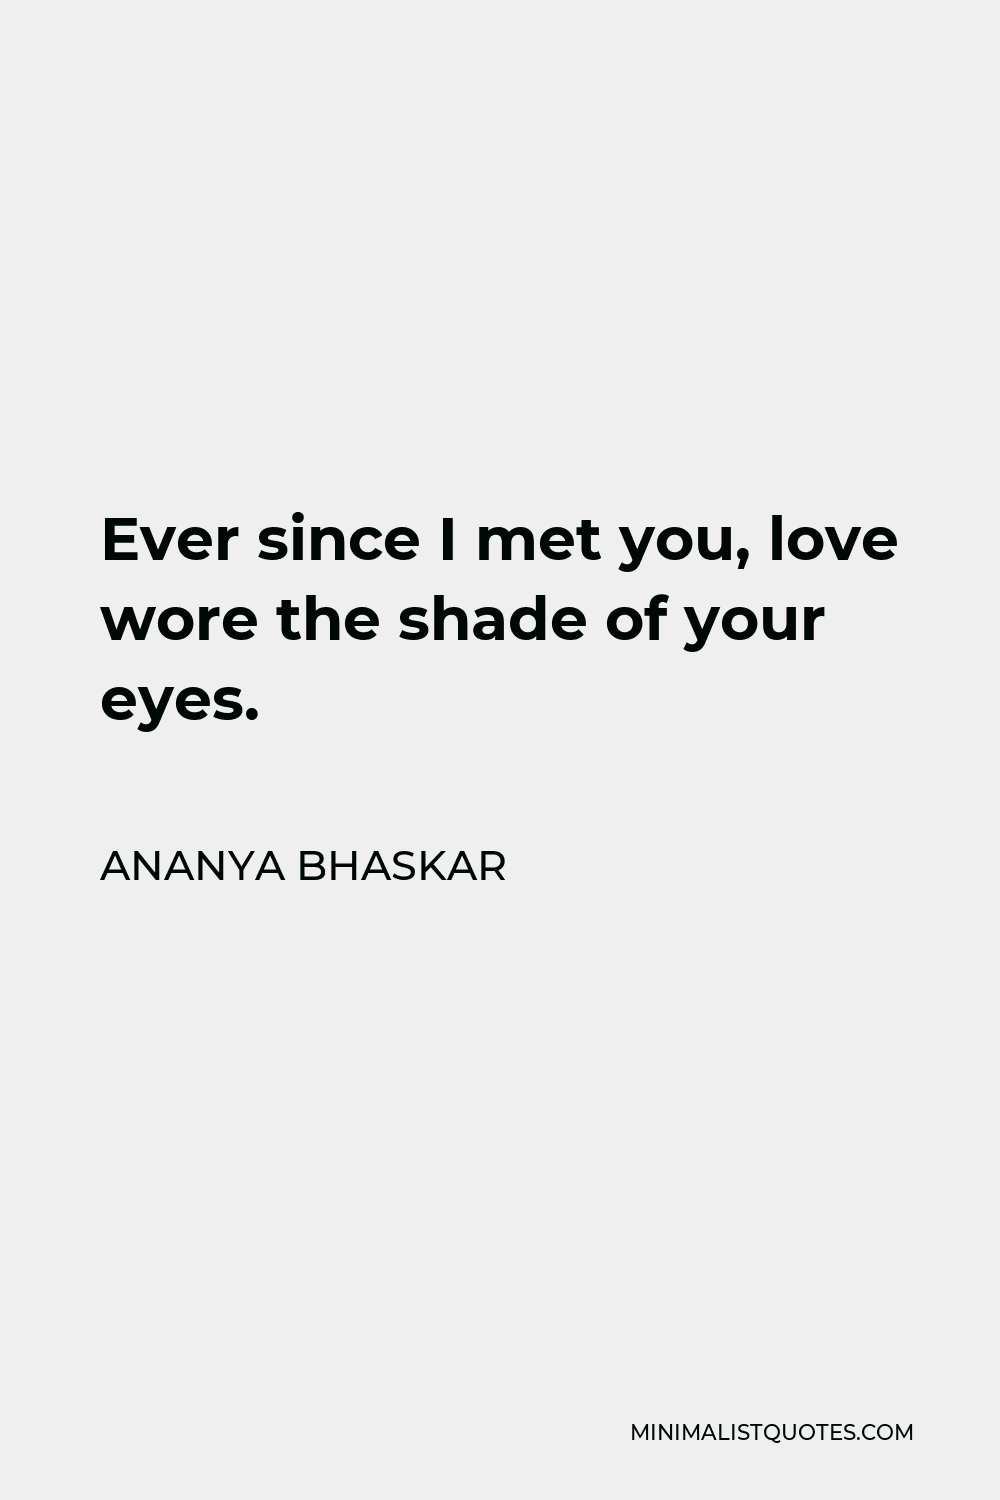 Ananya Bhaskar Quote - Ever since I met you, love wore the shade of your eyes.